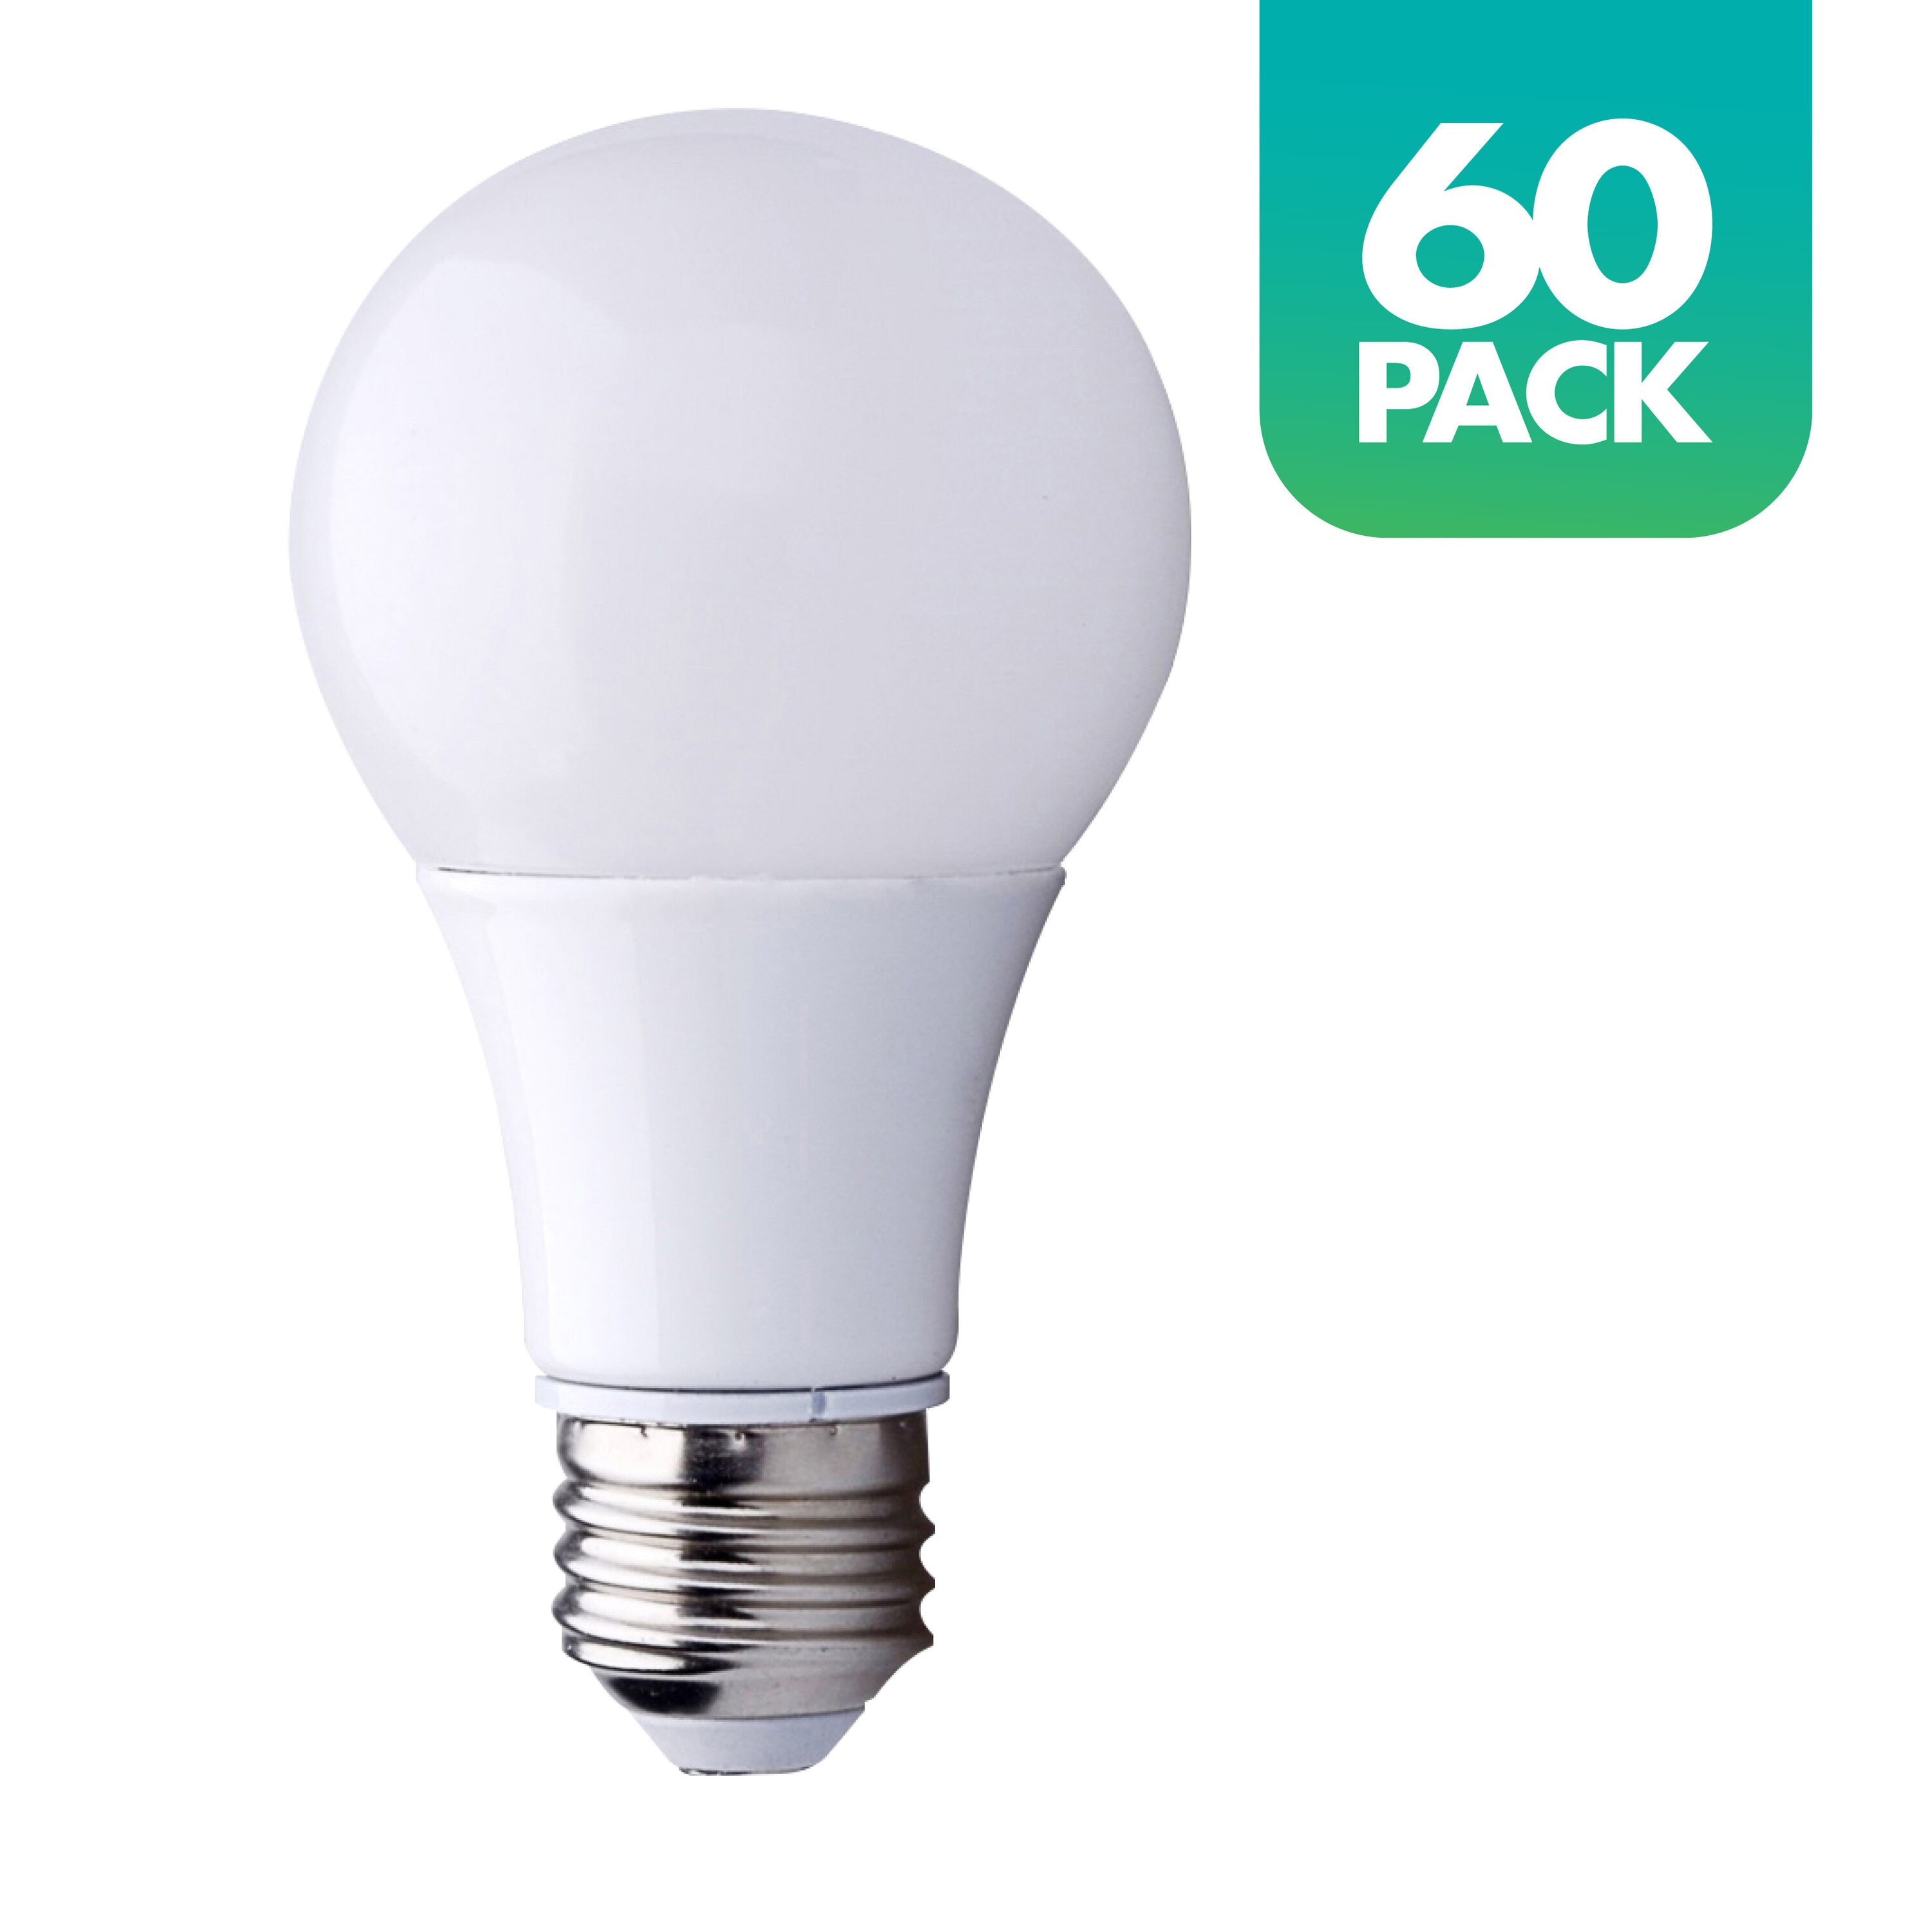 In detail Heer werkplaats Simply Conserve Quick Install Contract Pack ENERGY STAR 60-Watt EQ A19 Soft  White Medium Base (e-26) Dimmable LED Light Bulb (60-Pack) in the General  Purpose LED Light Bulbs department at Lowes.com